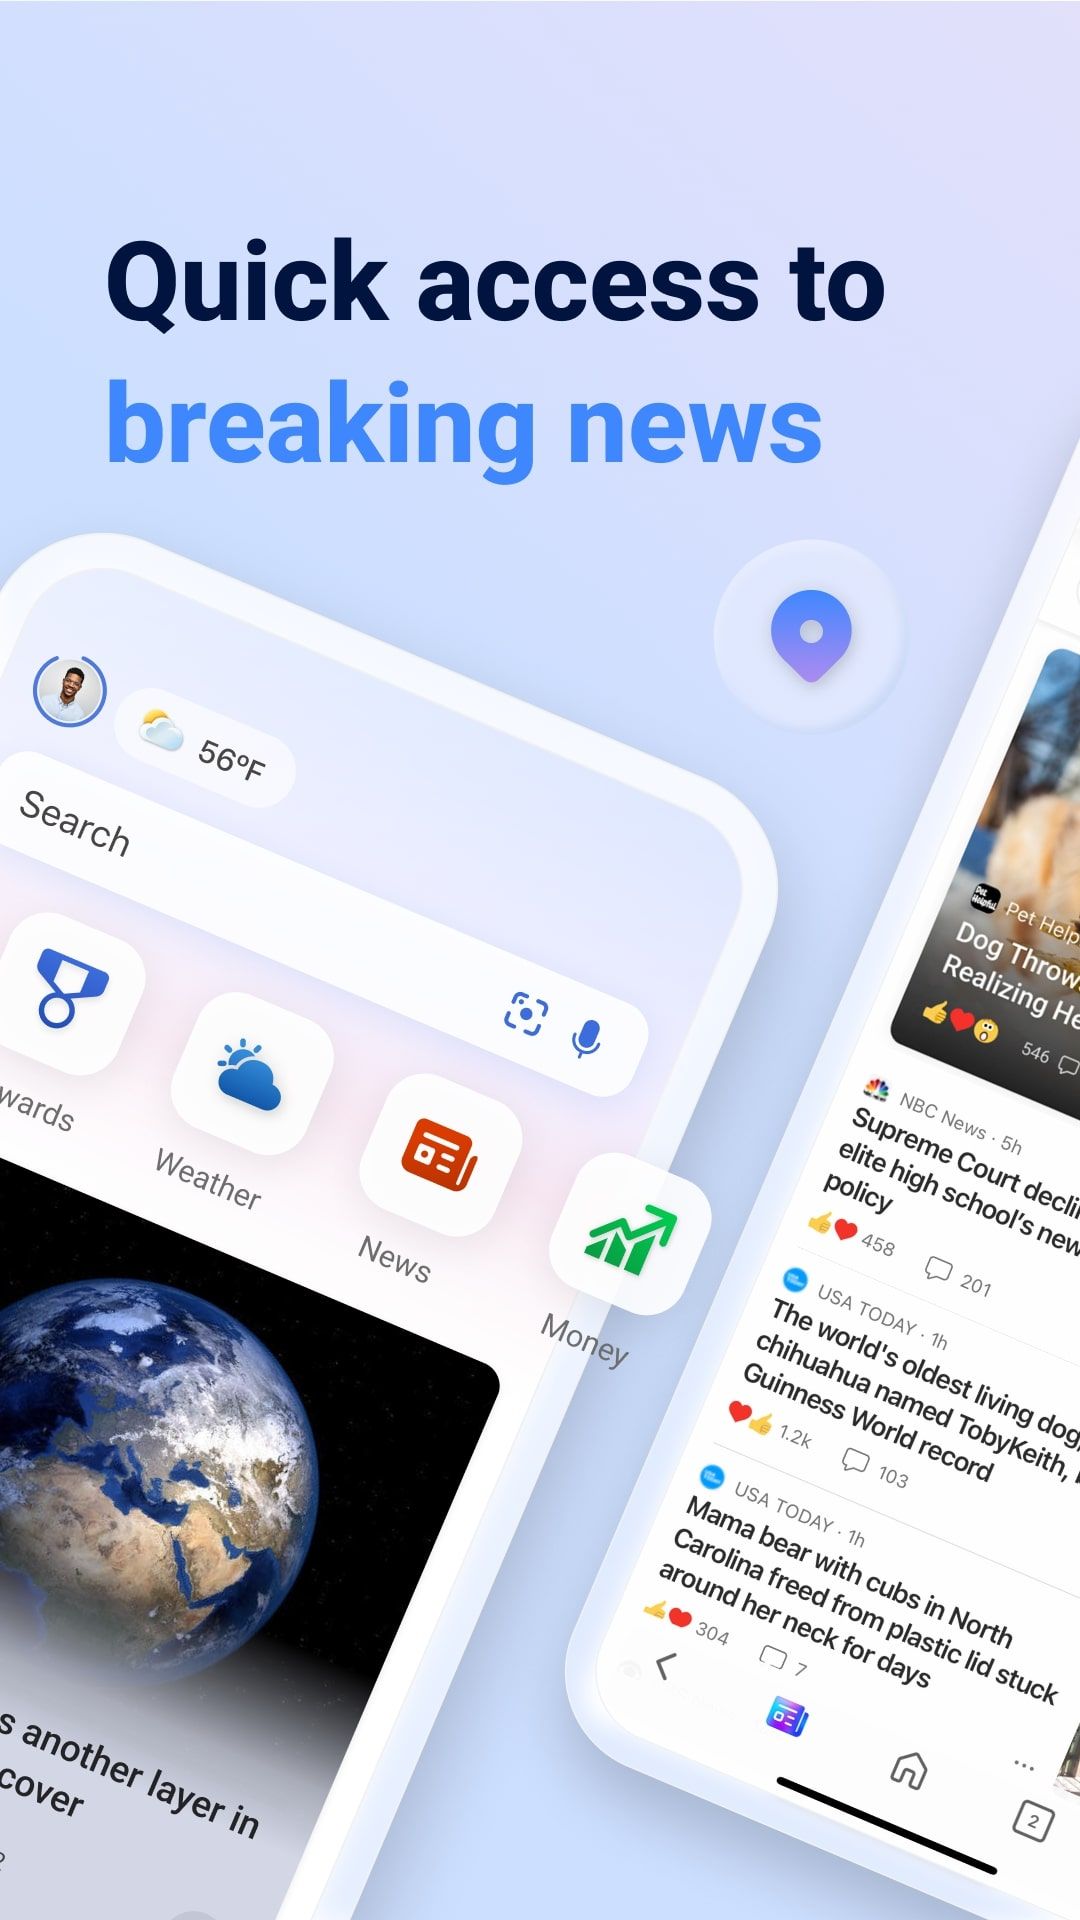 best-apple-news-alternatives-microsoft-start-news-and-more-quick-access-to-breaking-news